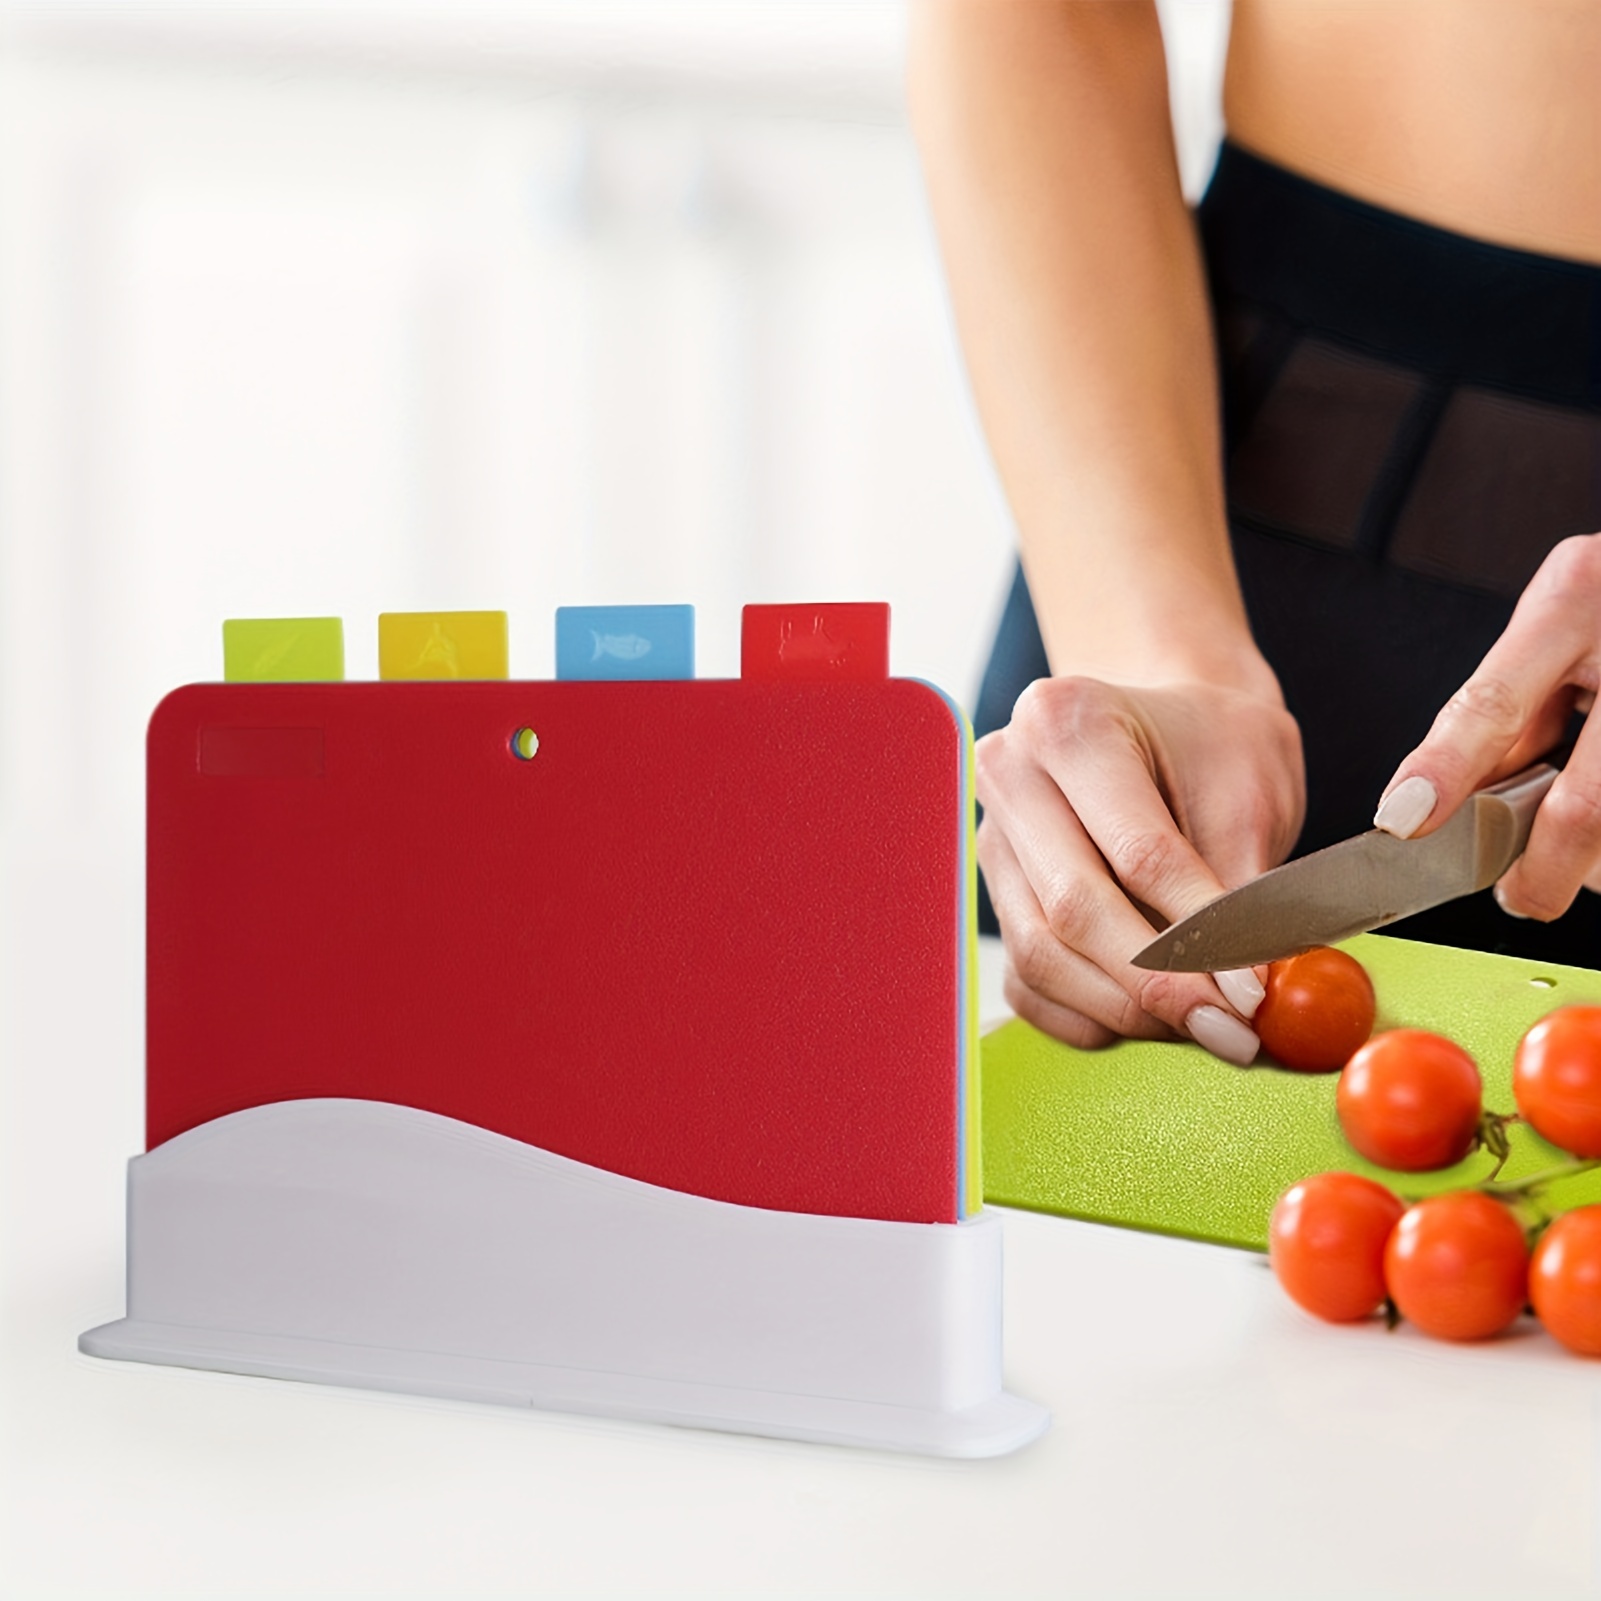 Cutting Boards 4Pcs/Set with Holder for Kitchen, Plastic Chopping